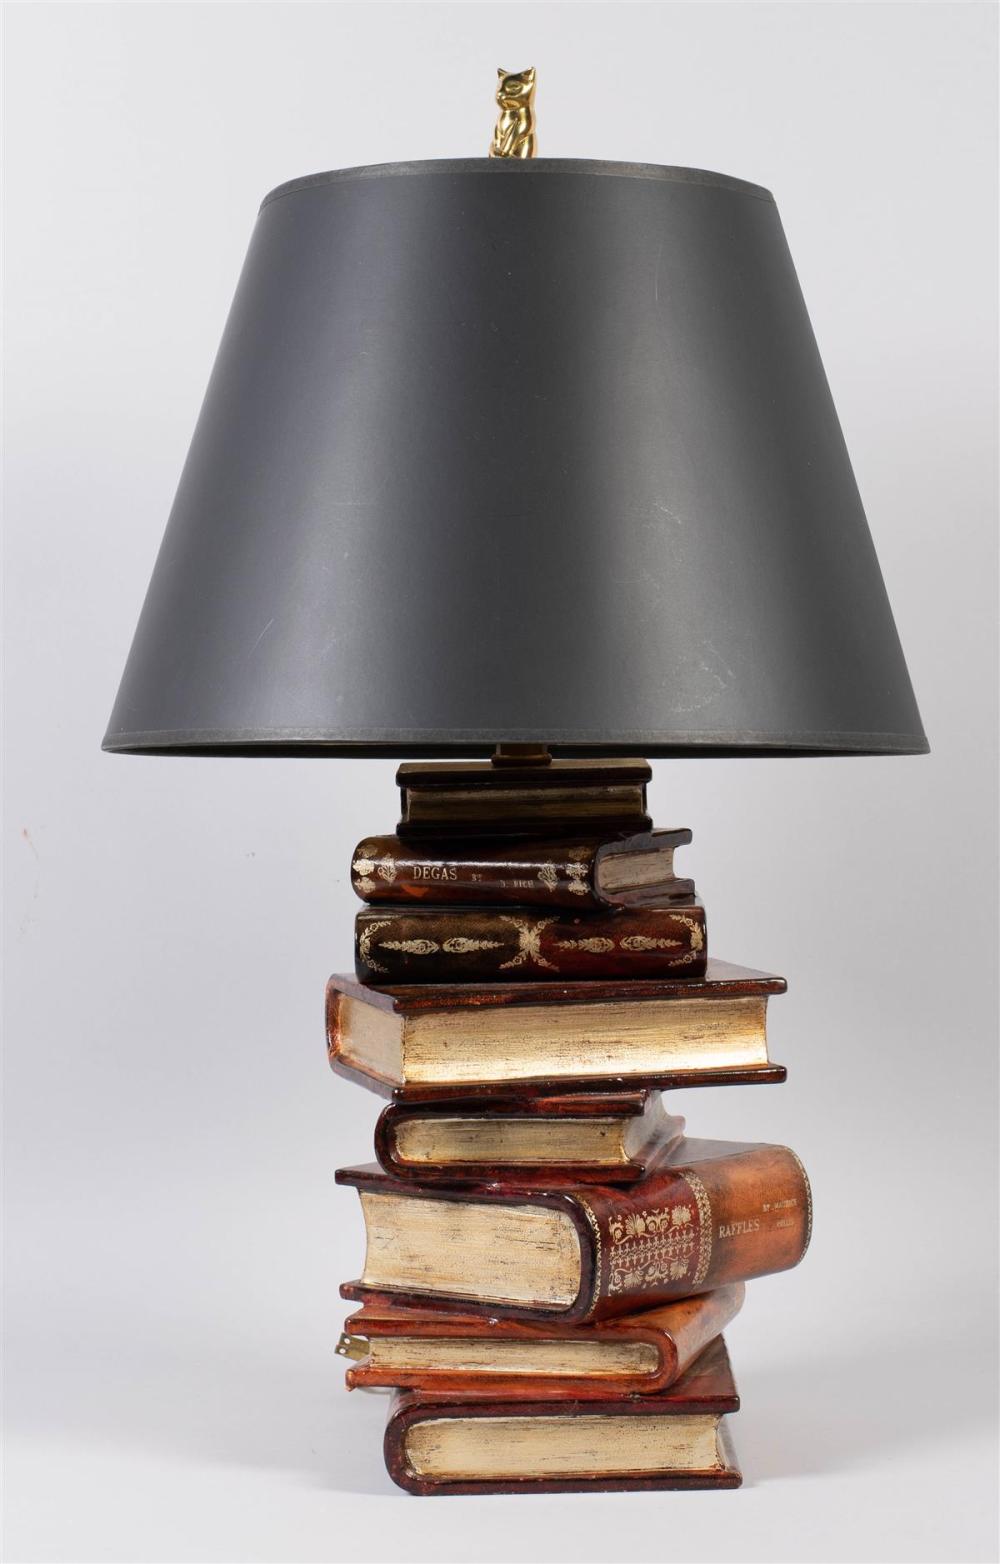 TABLE LAMP IN THE FORM OF A STACK